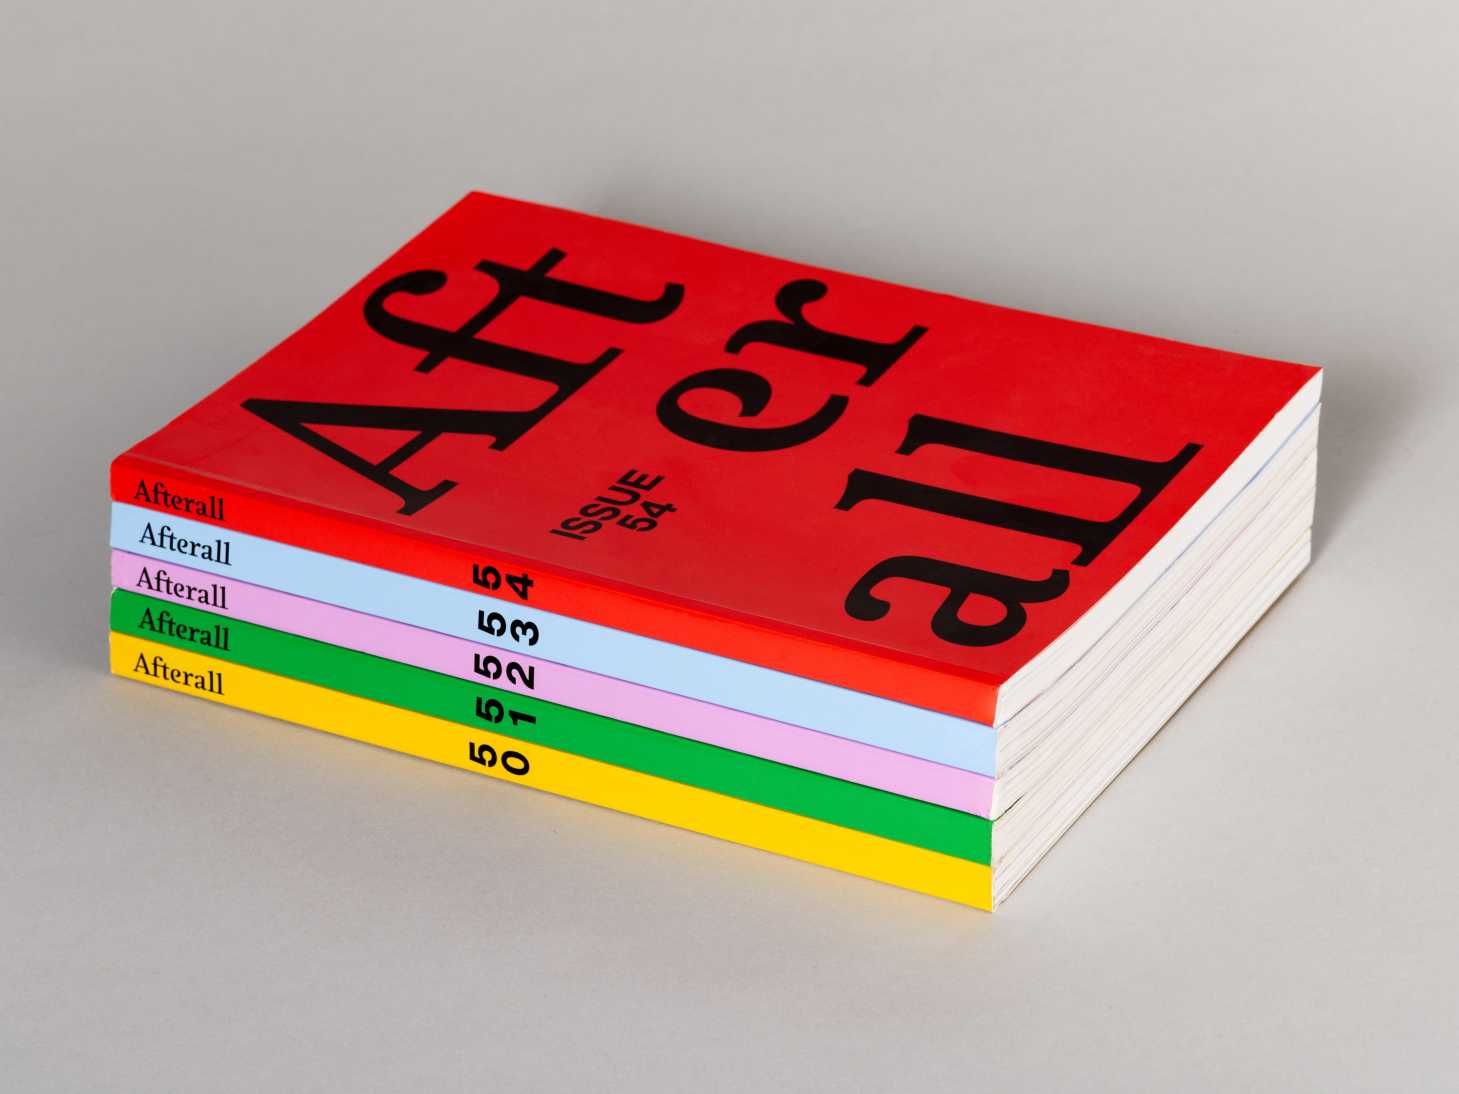 Stack of alternating magazine covers, all with the title "Afterall" and spines displaying their issue number. The covers are red, yellow, green, purple and blue.